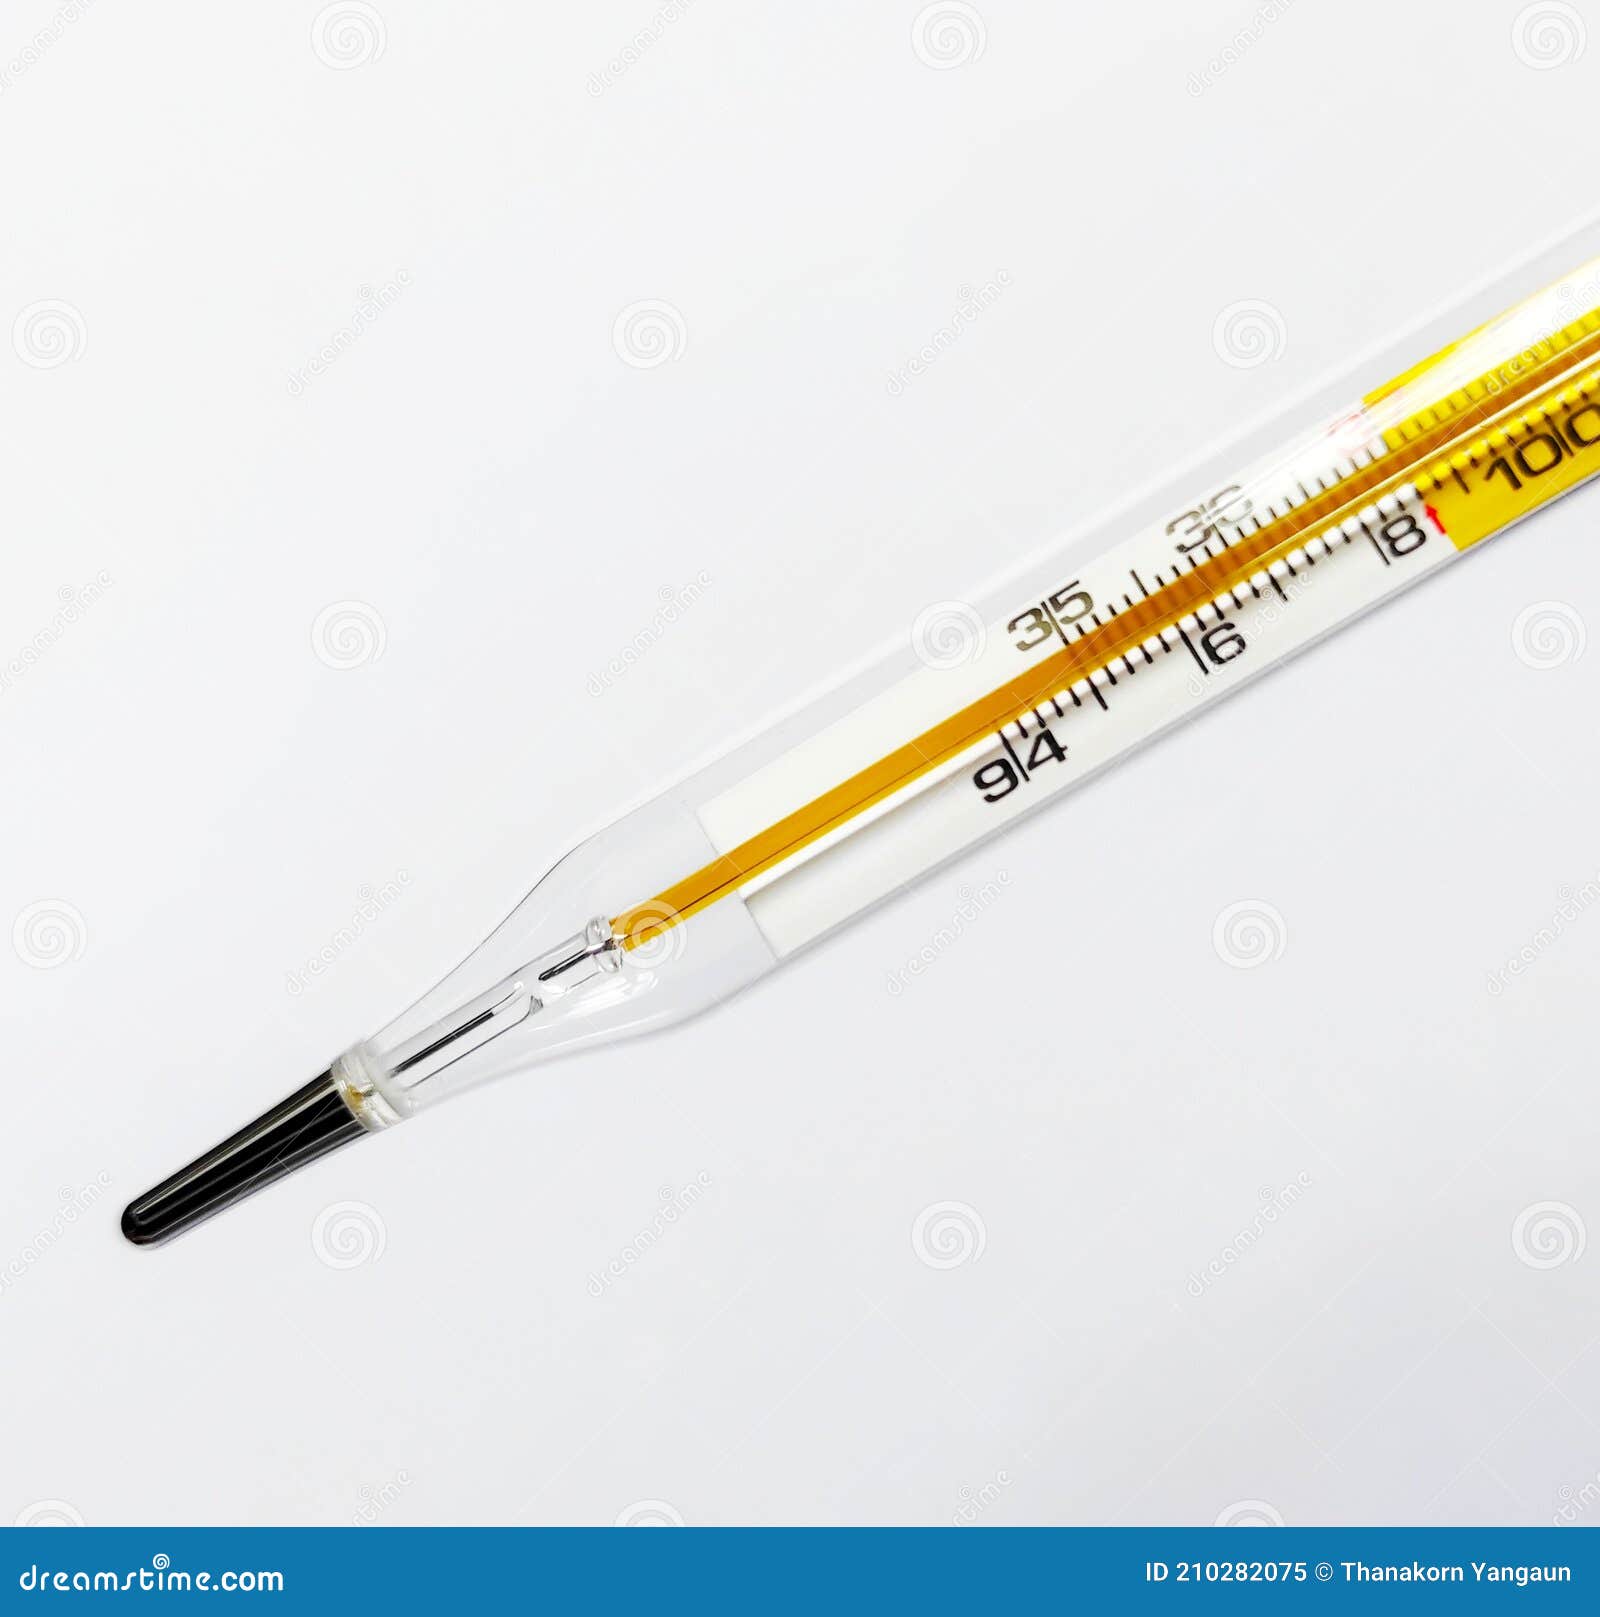 Thermometer used in hospitals